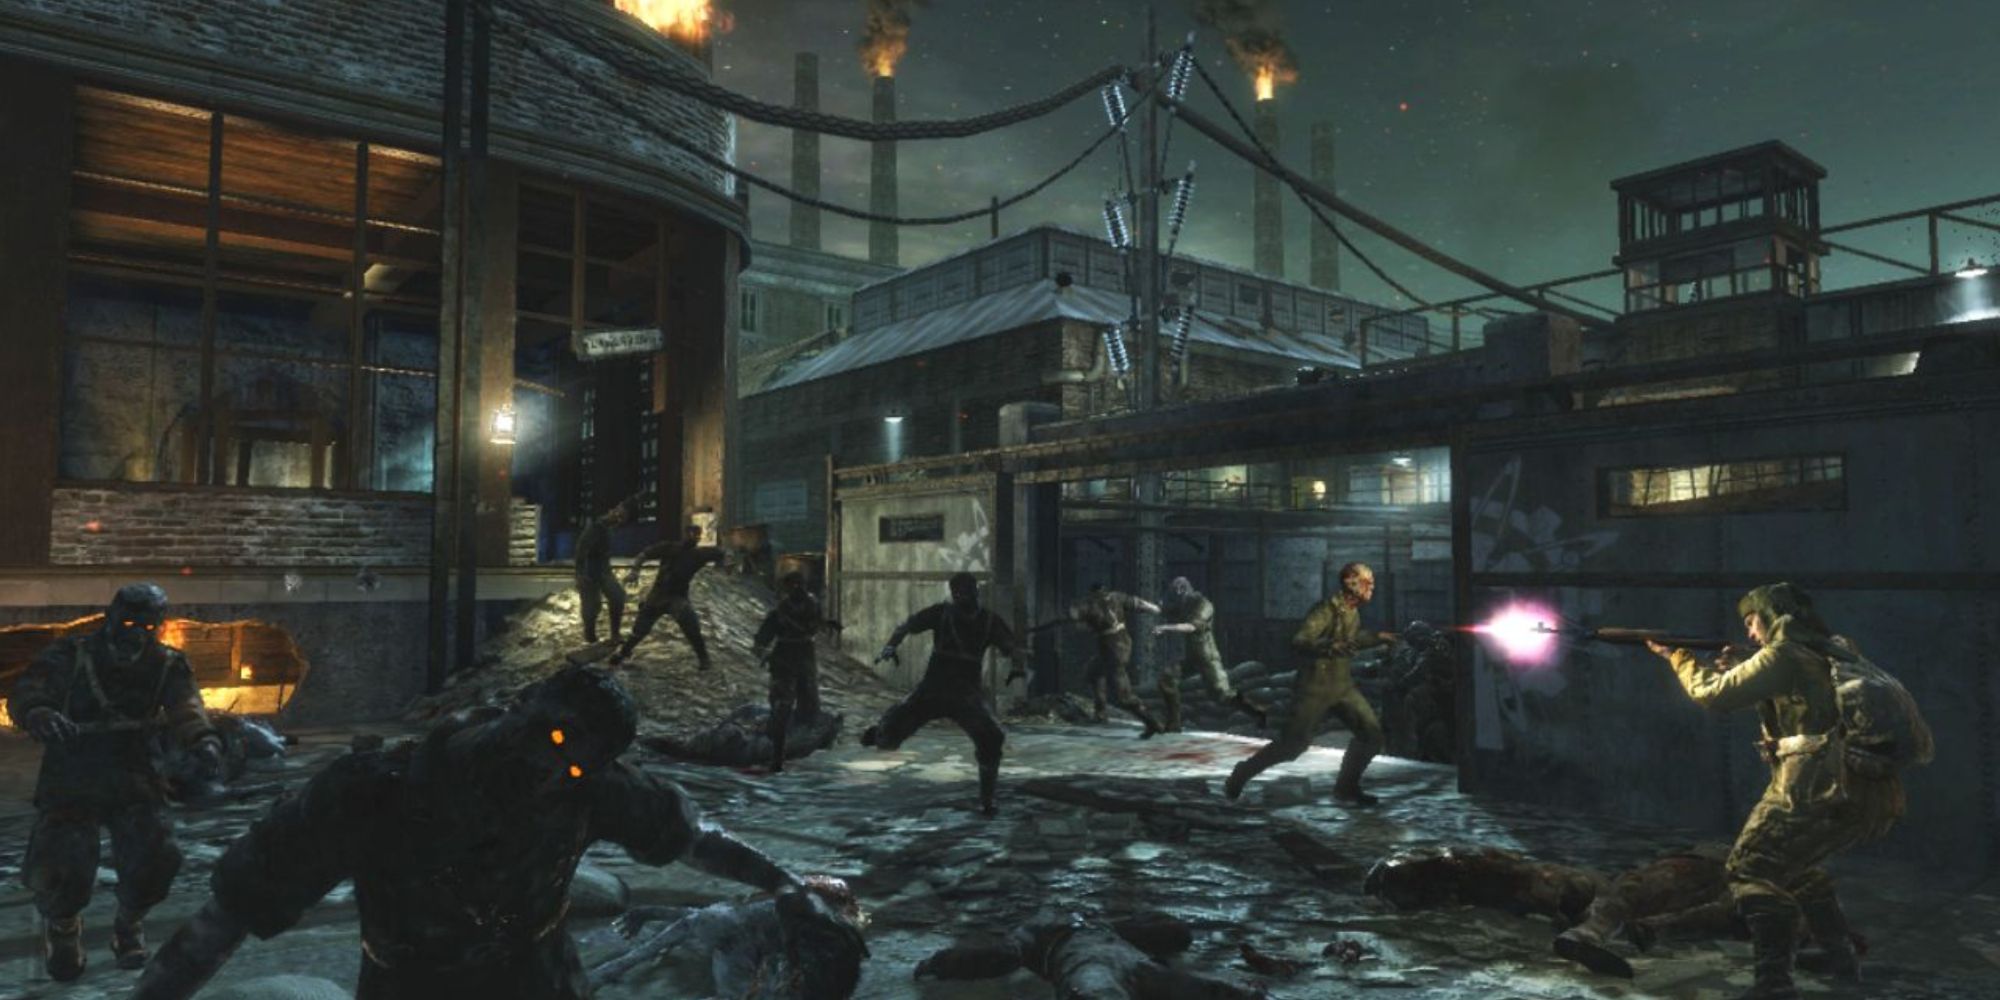 Promotional Image for Call of Duty: World at War